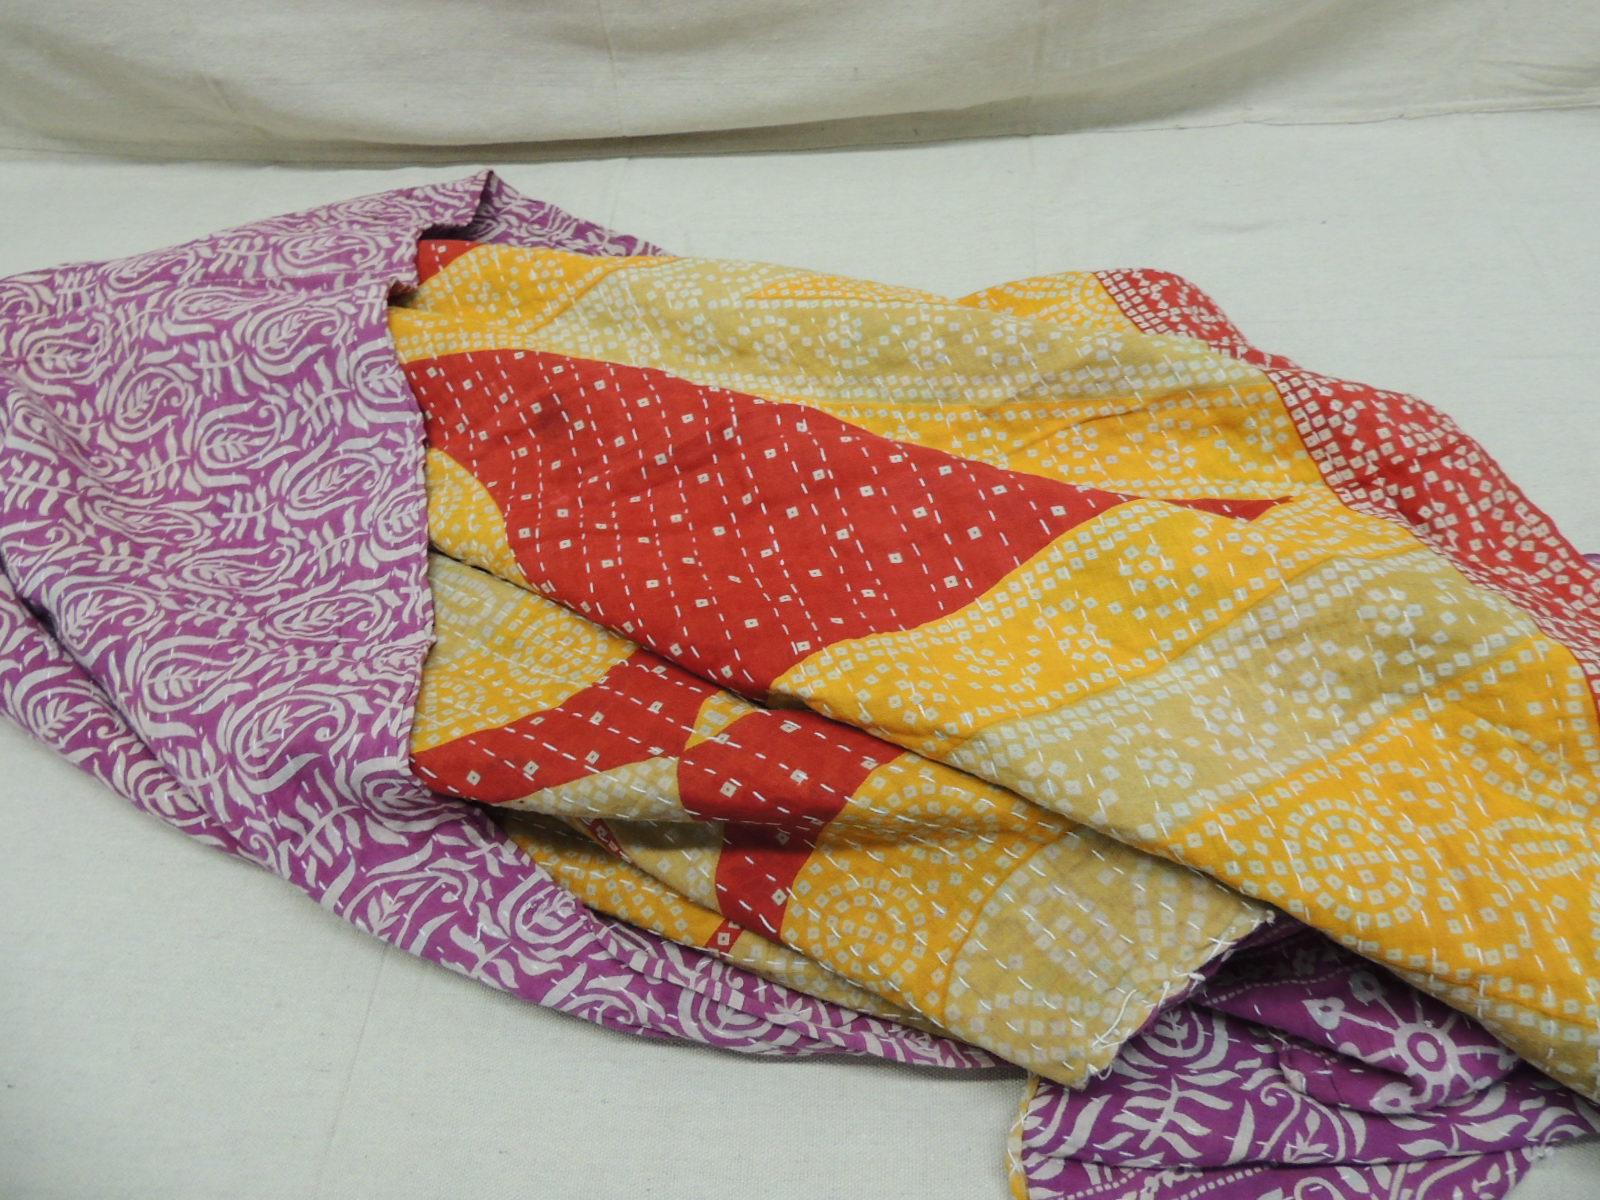 Cotton Indian Kantha Colorful Quilted Throw with Triangles, Circles and Flowers